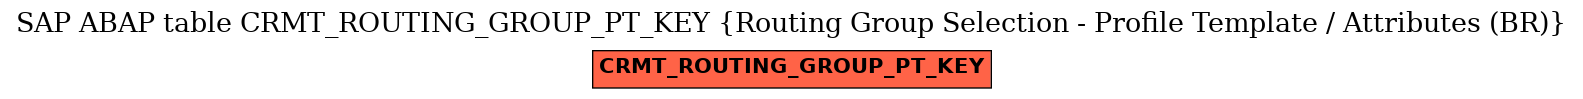 E-R Diagram for table CRMT_ROUTING_GROUP_PT_KEY (Routing Group Selection - Profile Template / Attributes (BR))